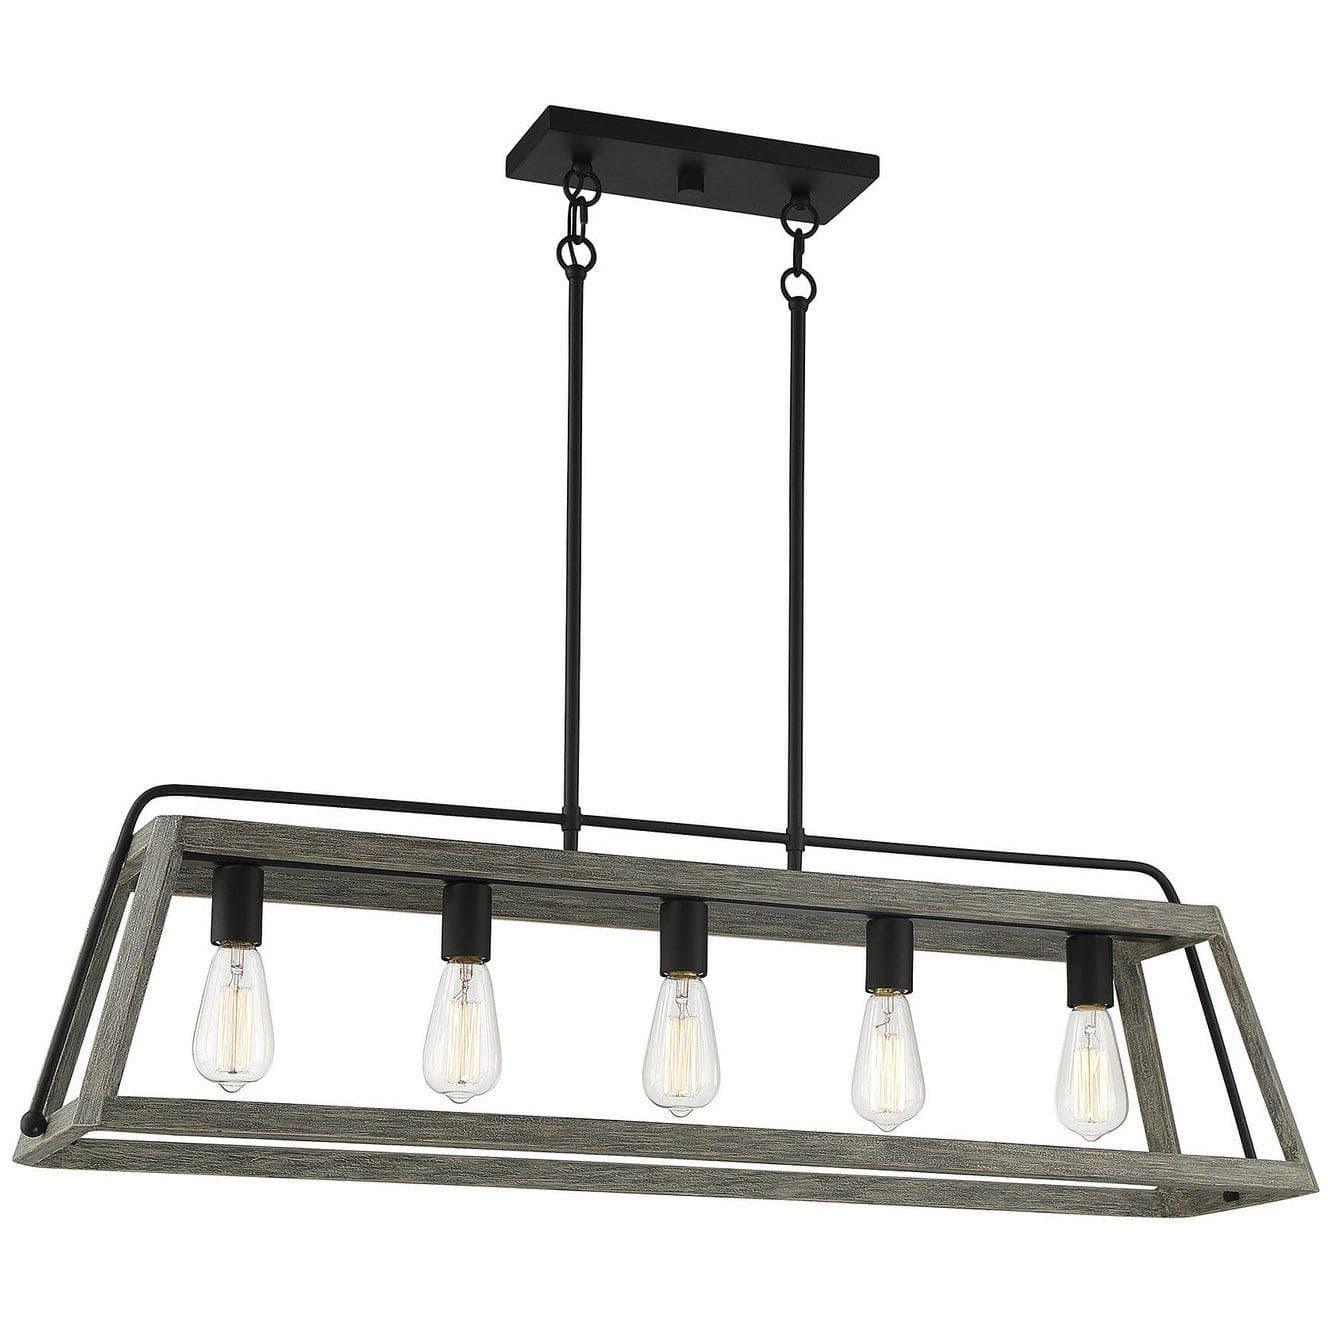 Savoy House - Hasting Five Light Linear Chandelier - 1-8892-5-101 | Montreal Lighting & Hardware